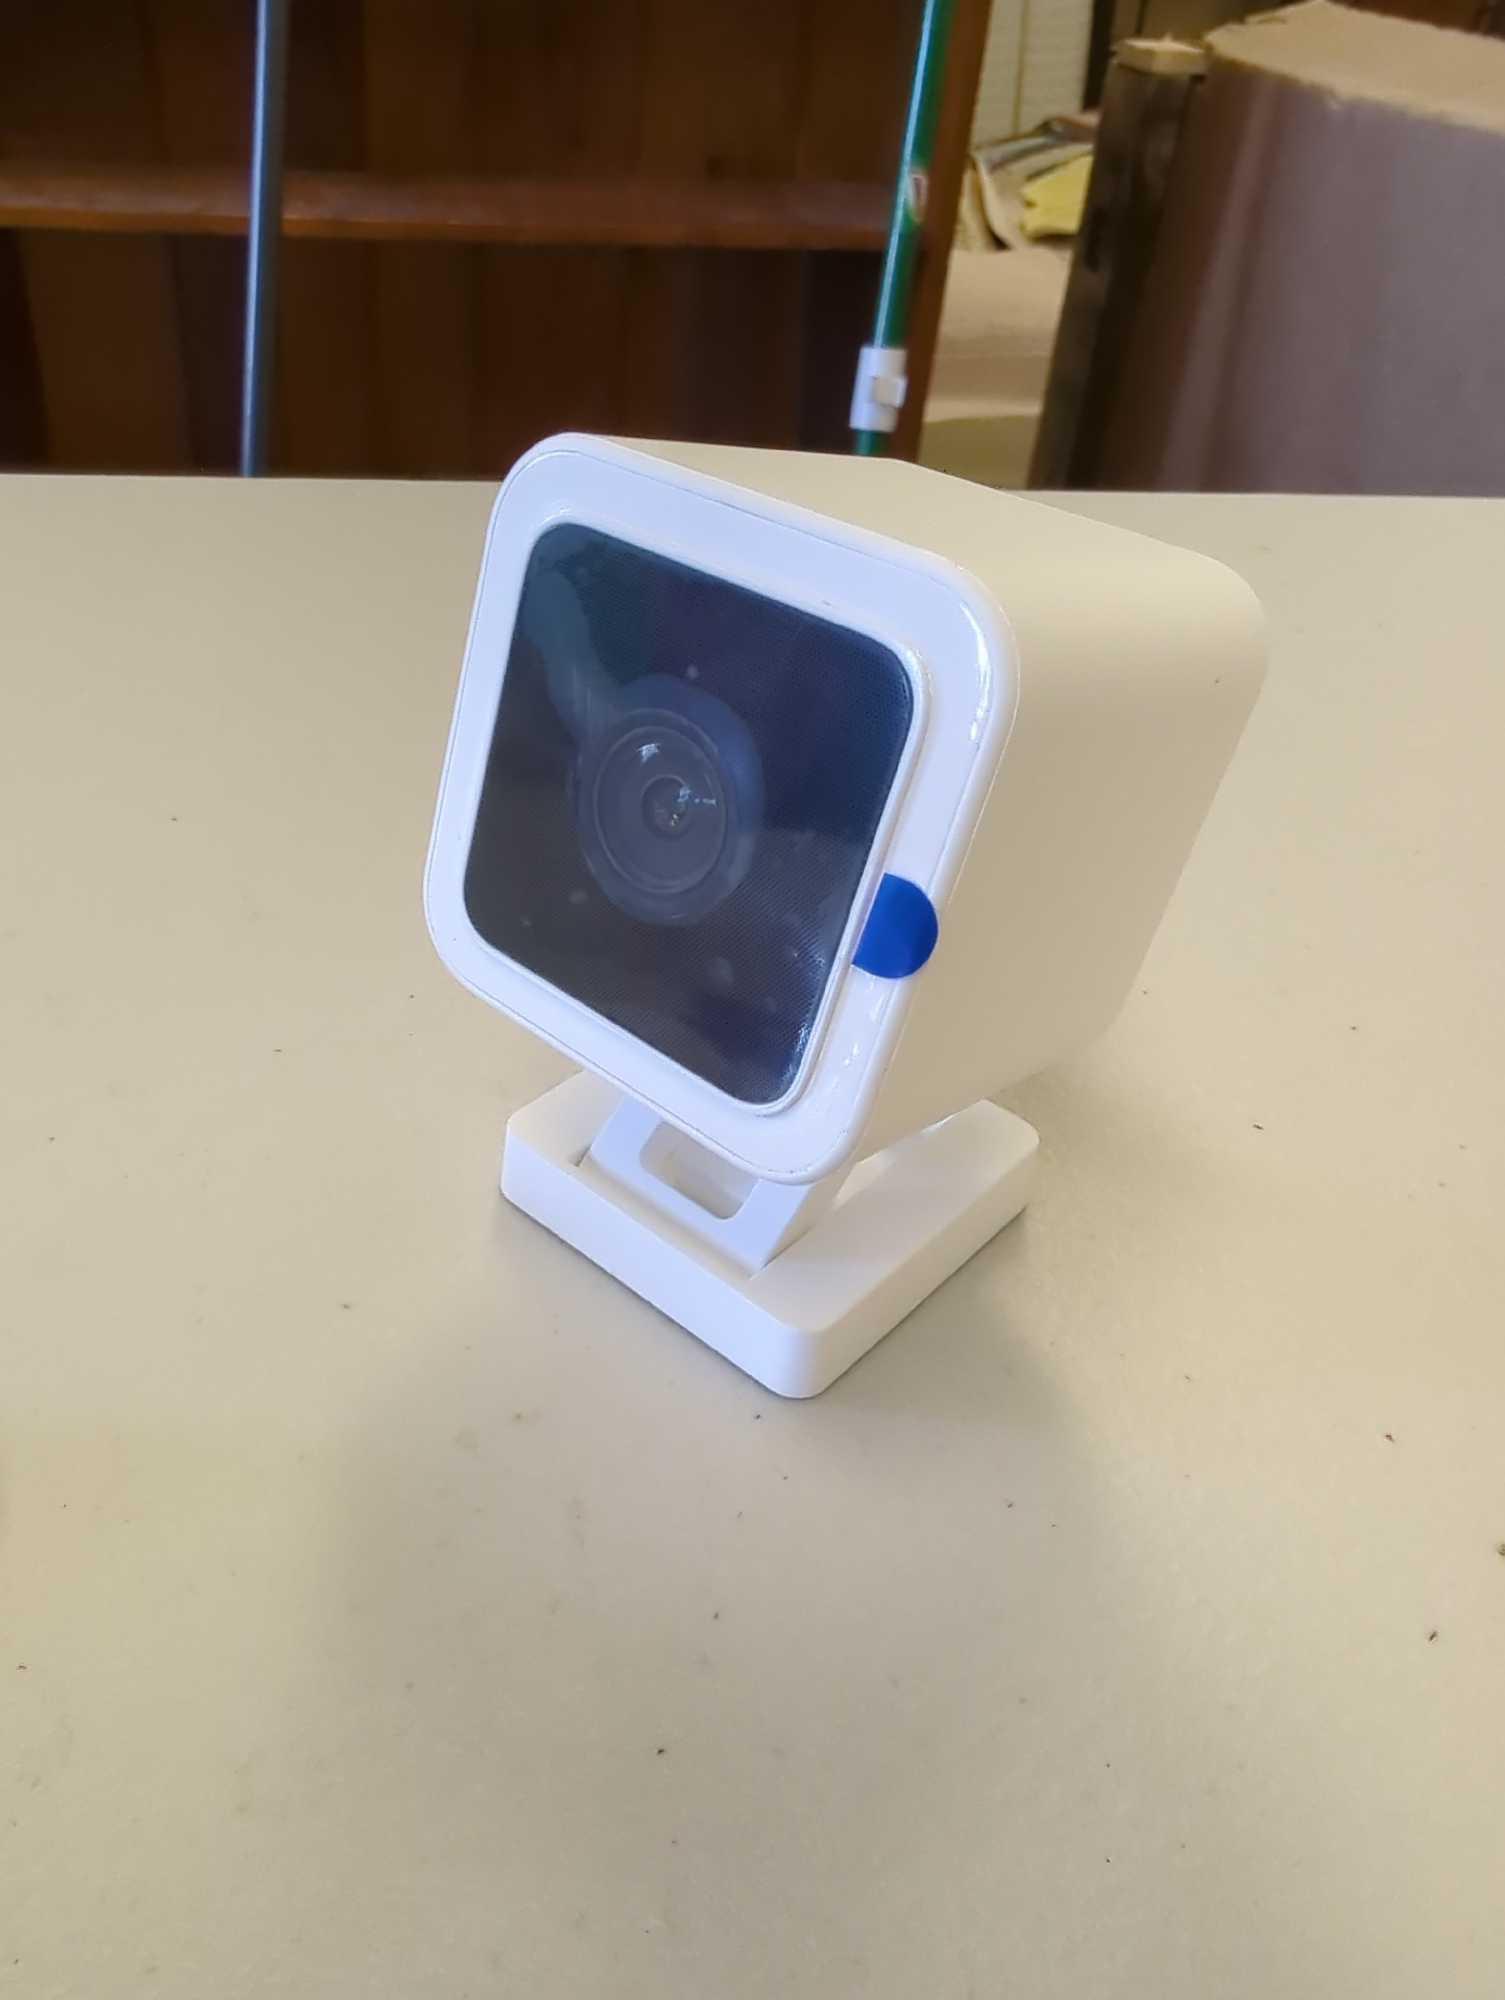 WYZE Cam v3 with Color Night Vision, Wired 1080p HD Indoor/Outdoor Video Camera. Comes as is shown